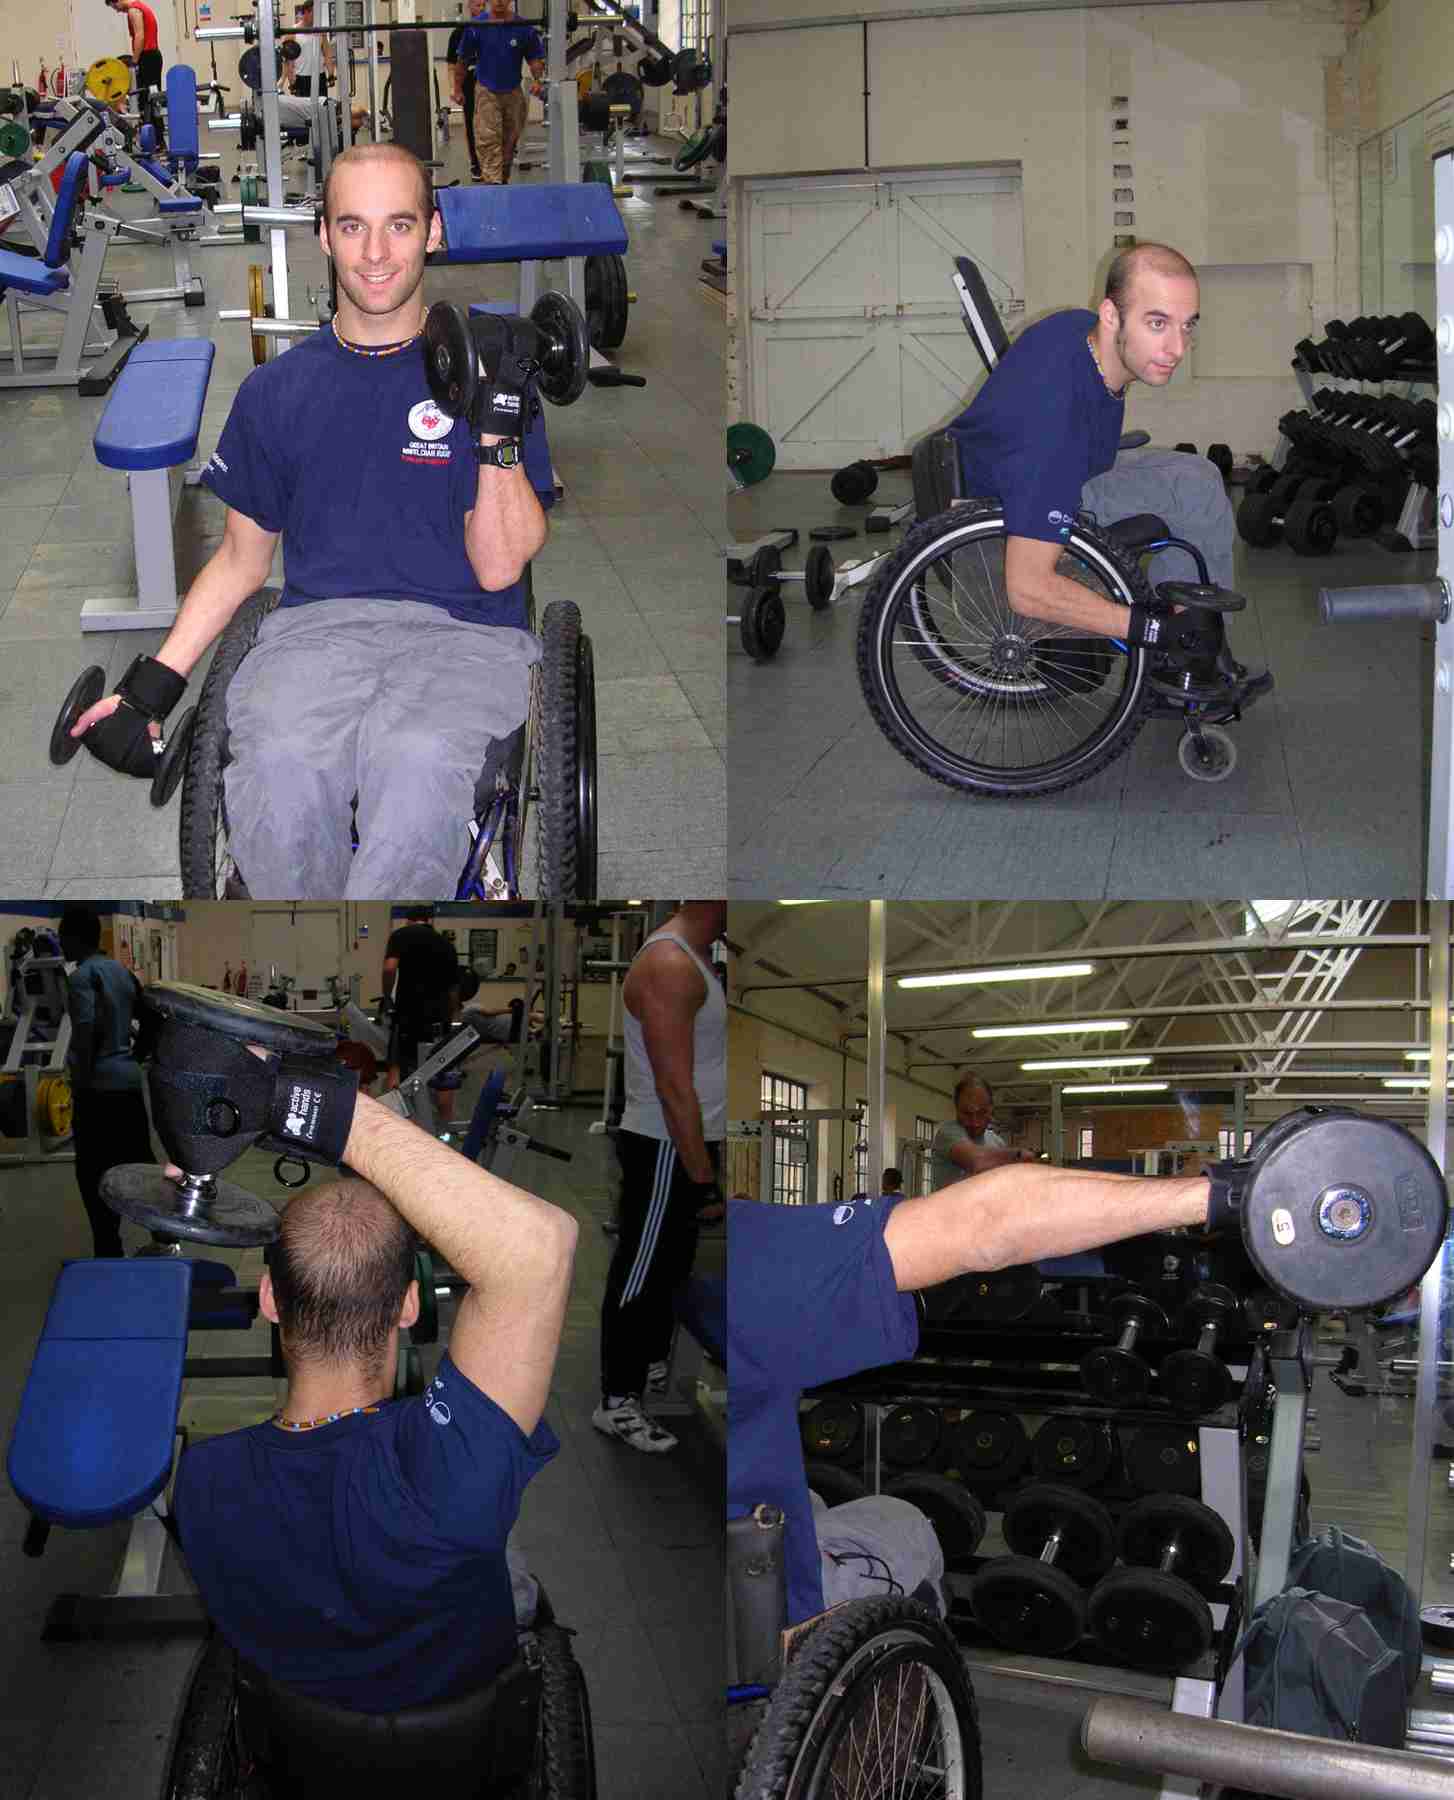 Rob with General Purpose aid - free weights. Adaptive gym equipment. Suitable for reduced hand function: tetra, quad, cerebral palsy, SCI, spinal cord injury, limb difference, stroke and more.